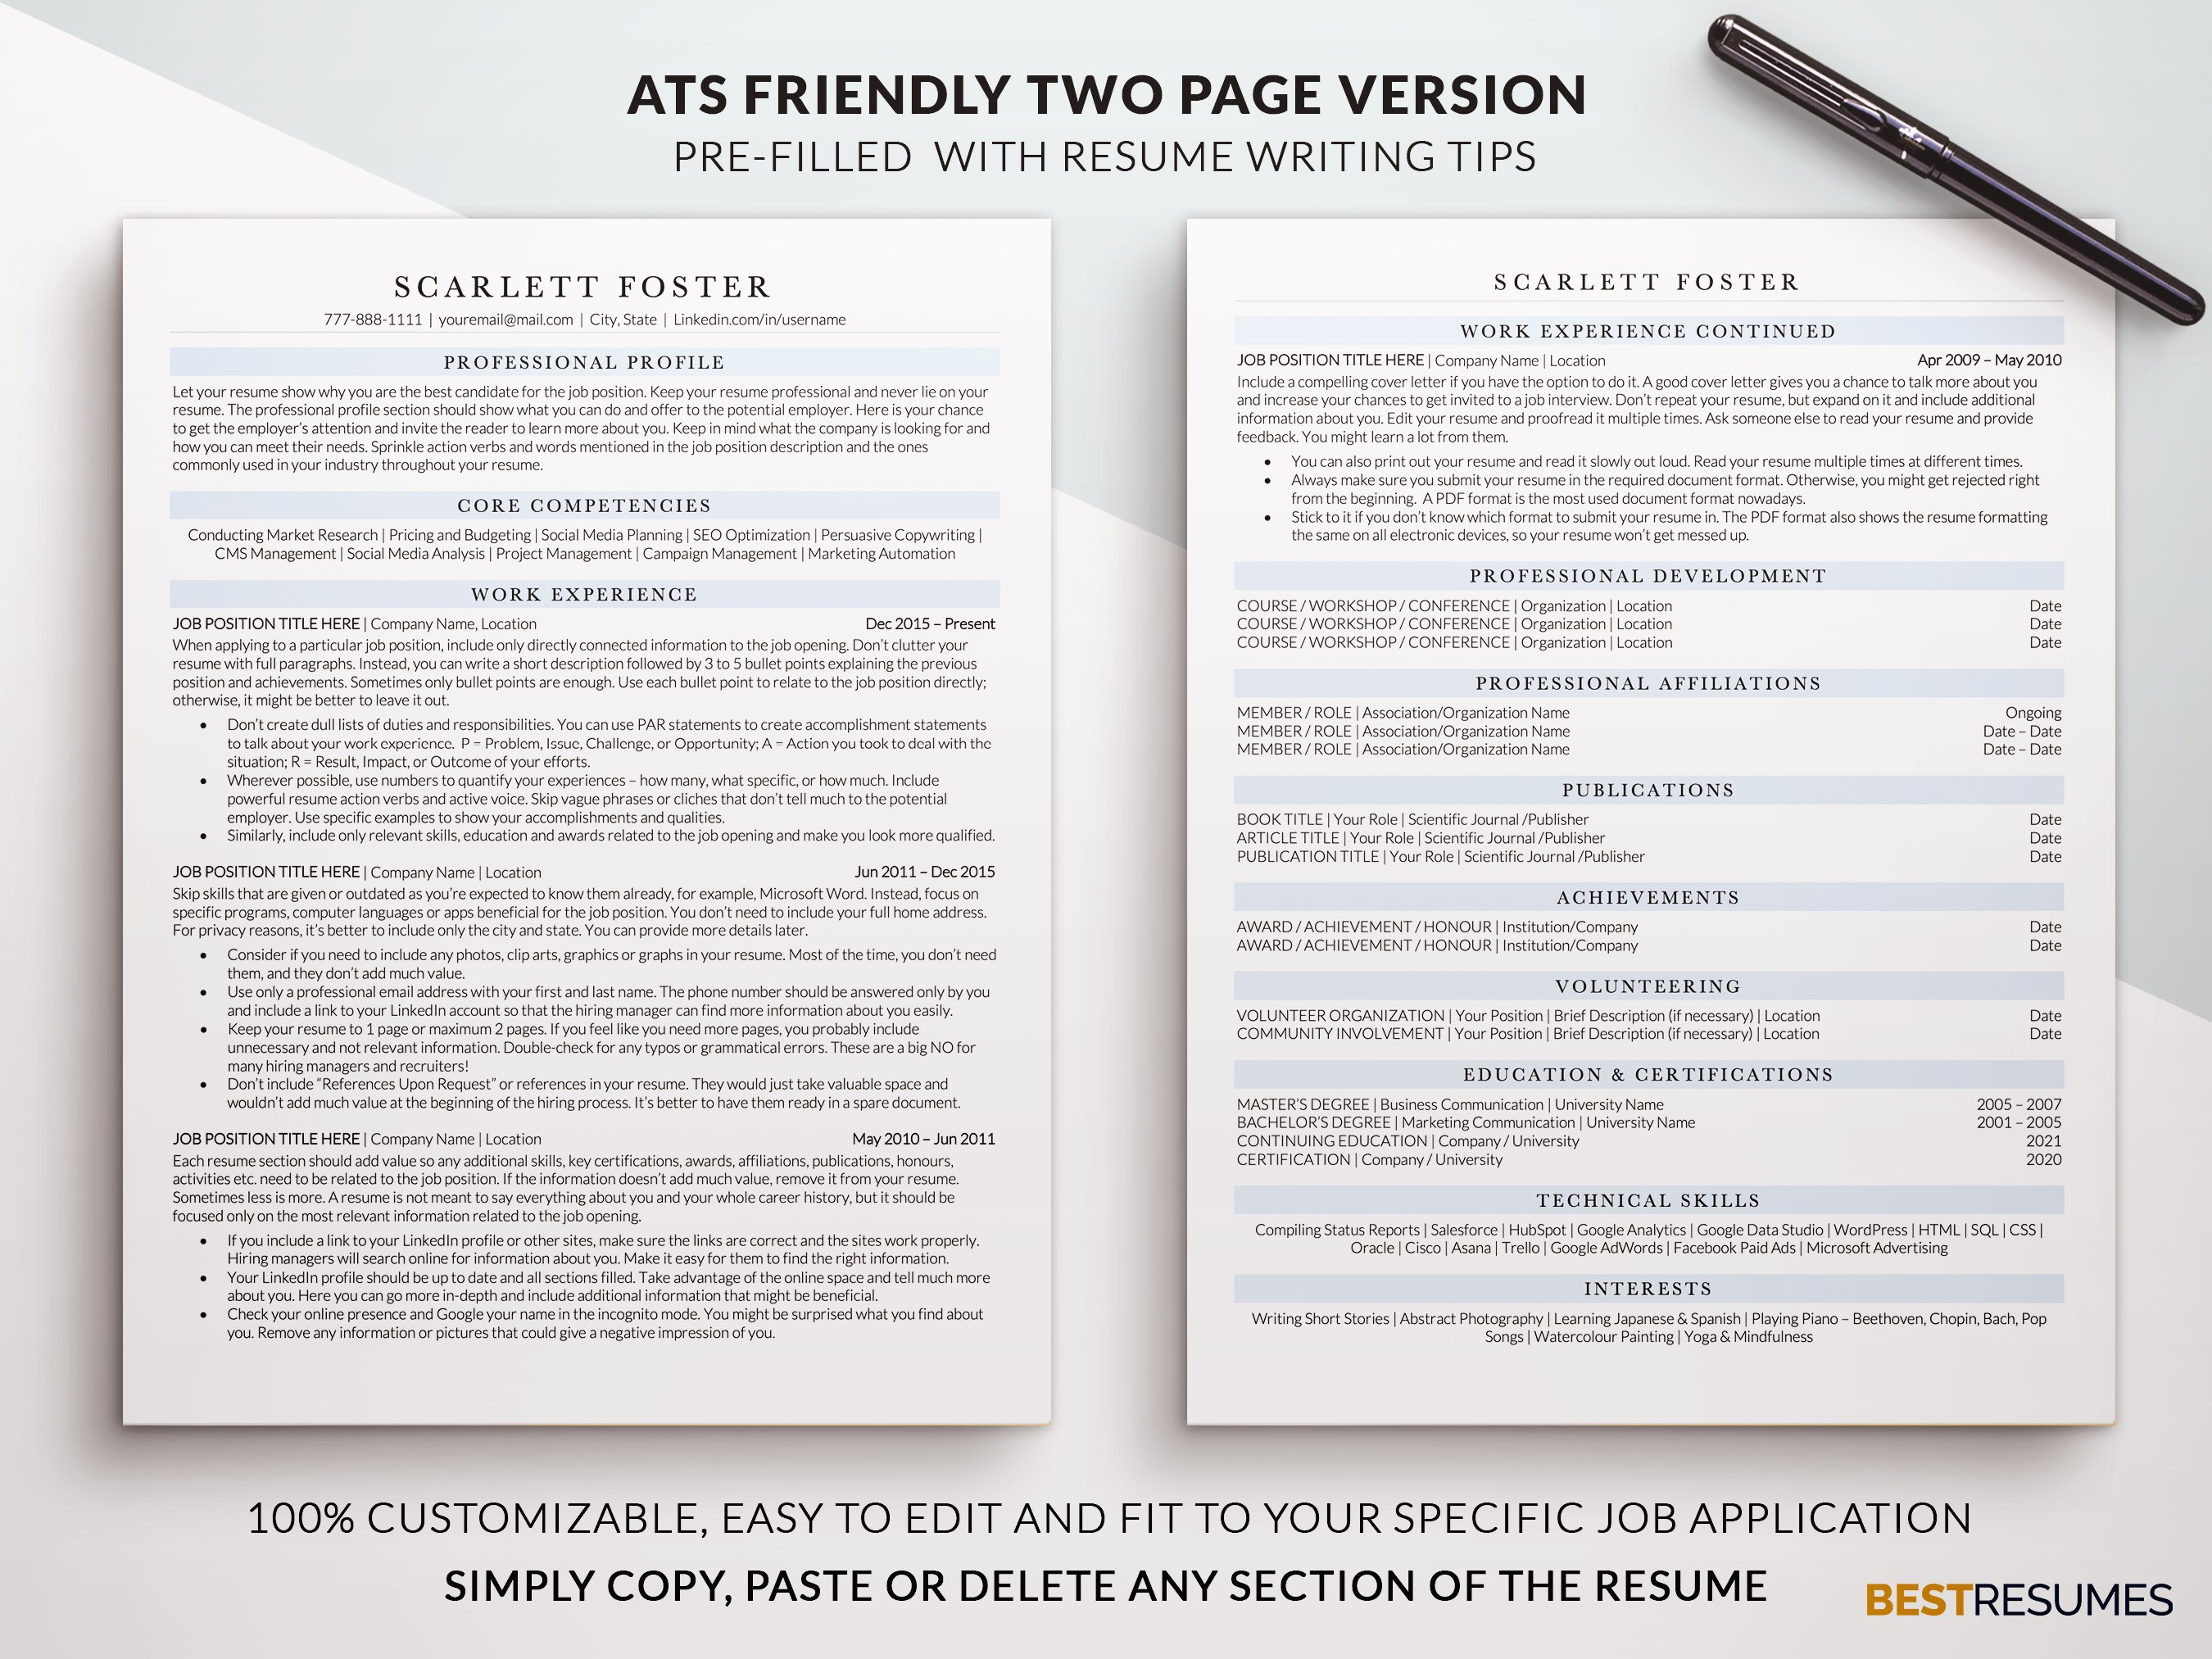 ats friendly executive resume template two page resume scarlett foster 273